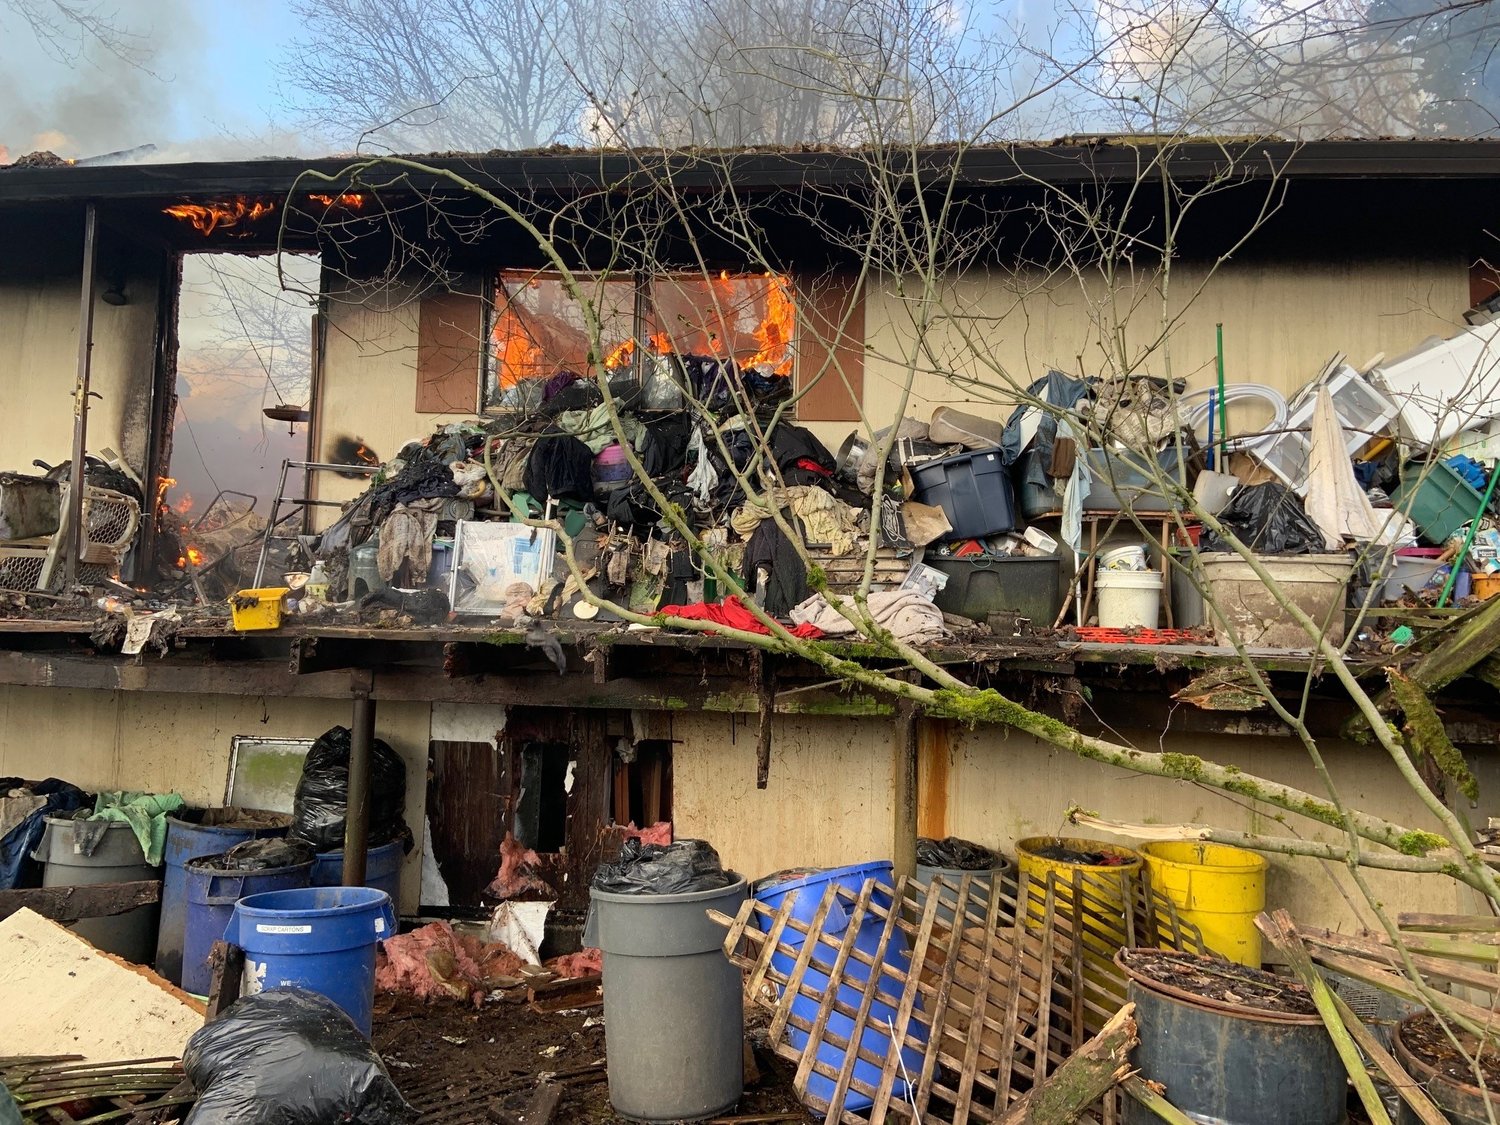 Clutter on a deck prevented firefighters from gaining entry into a home that caught fire at 8710 NE 244th St. on March 16. 